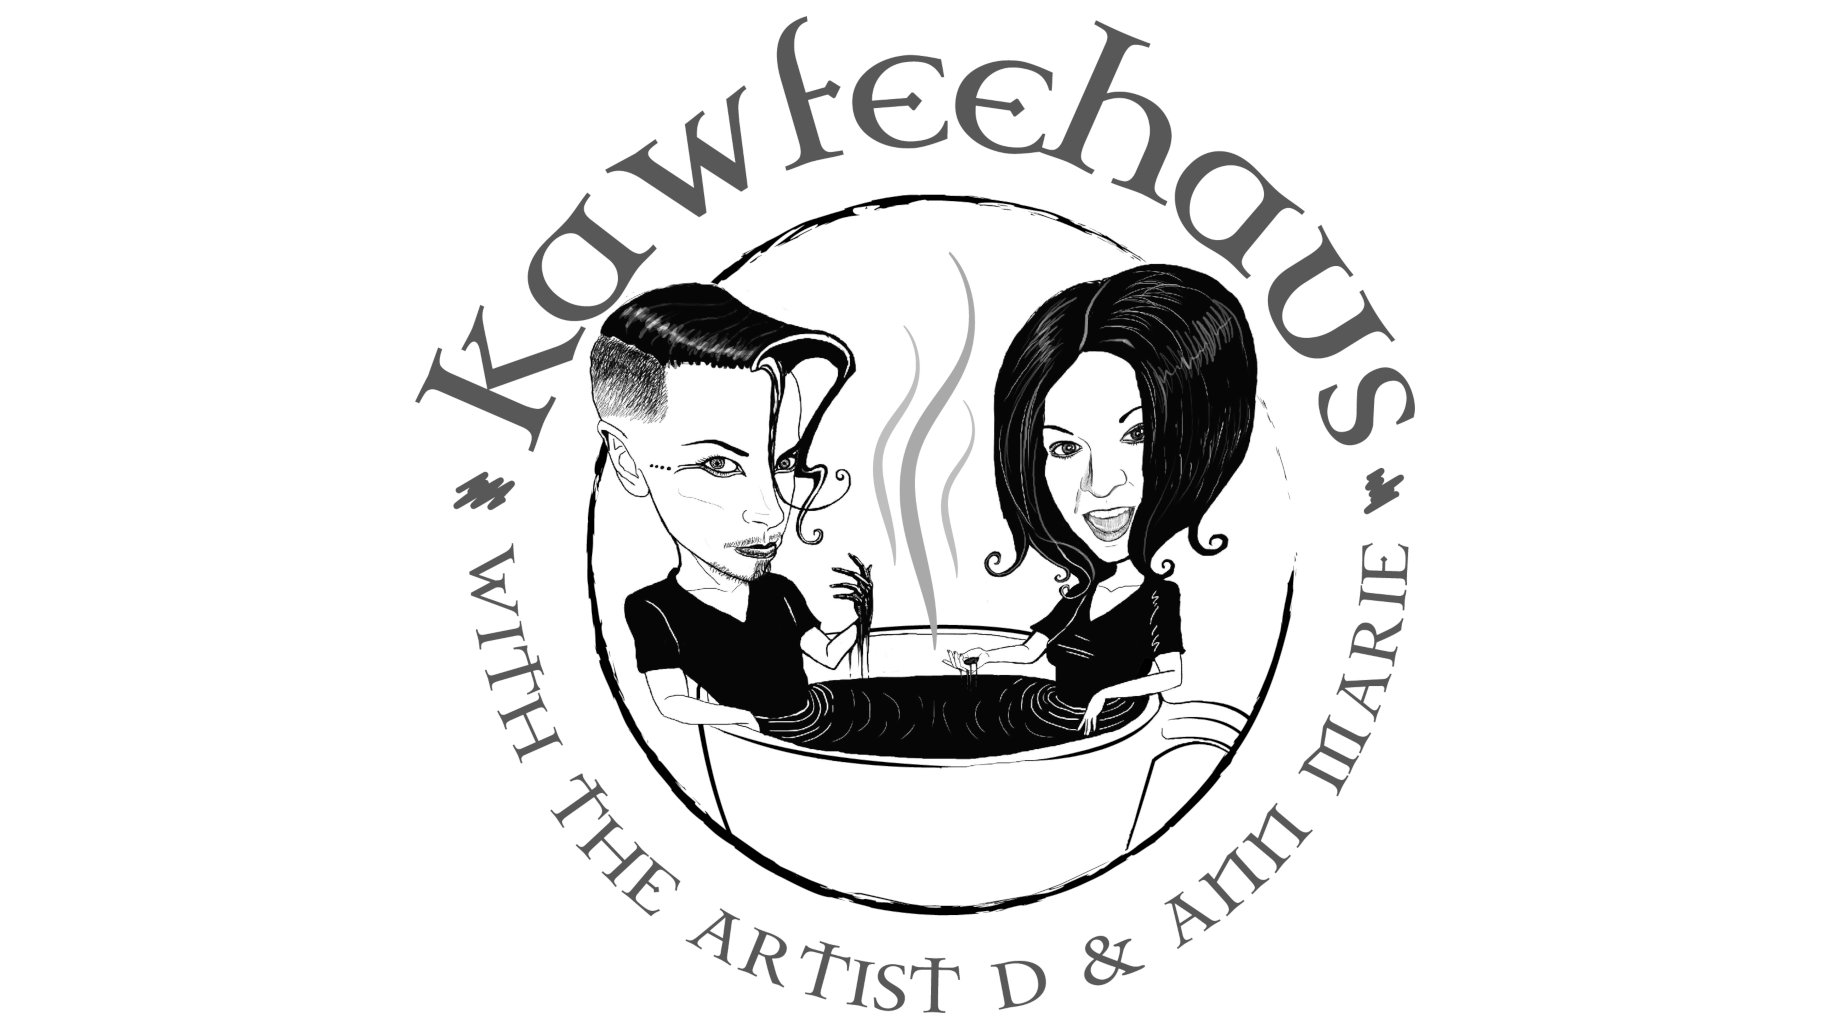 Kawfeehaus with The Artist D and Ann Marie